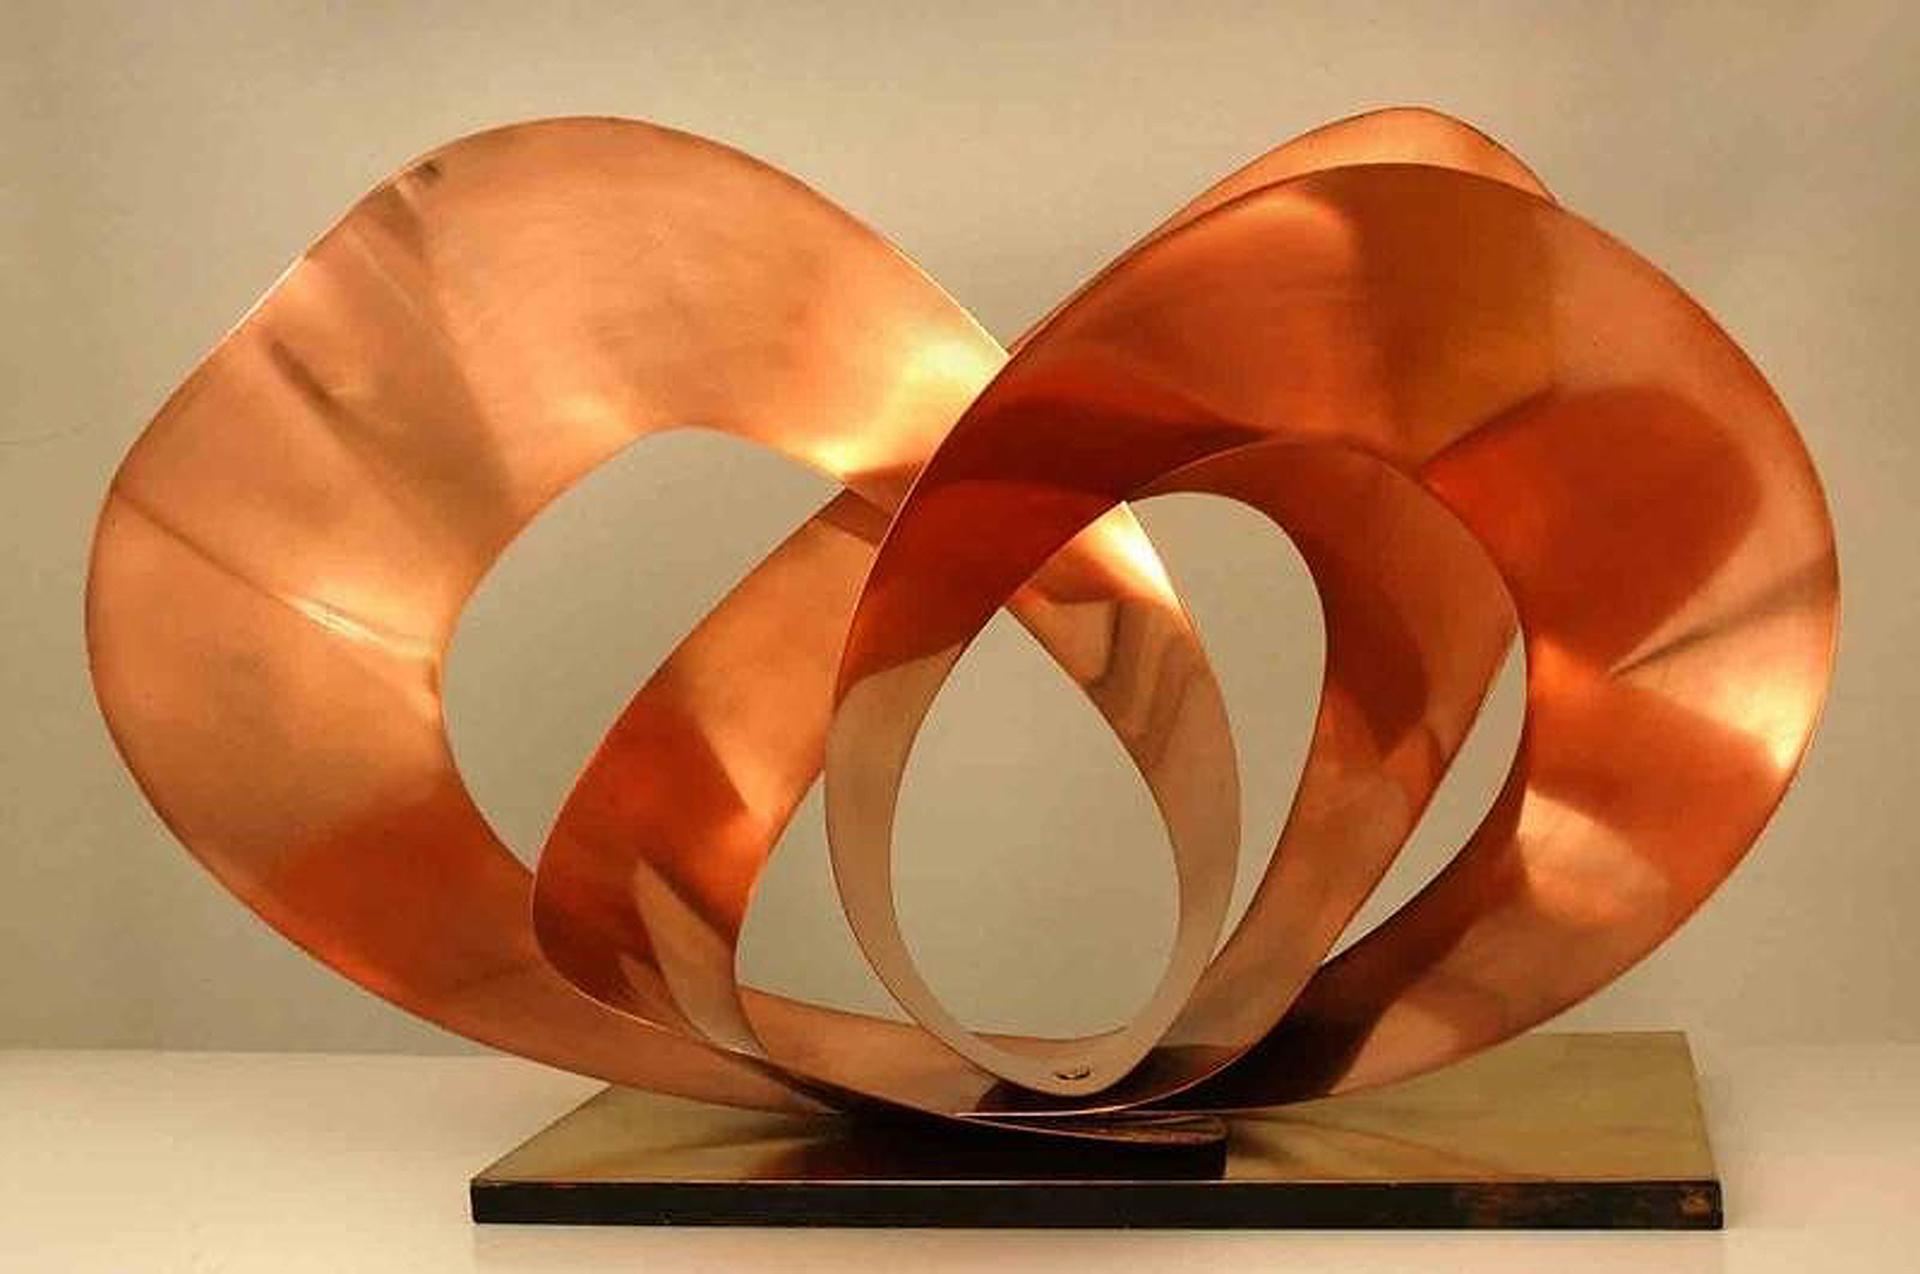 Barbara Hepworth, Galliard - Forms in Movement (1956), copper and bronze, Collection of Aratoi Wairarapa Museum of Art and History 